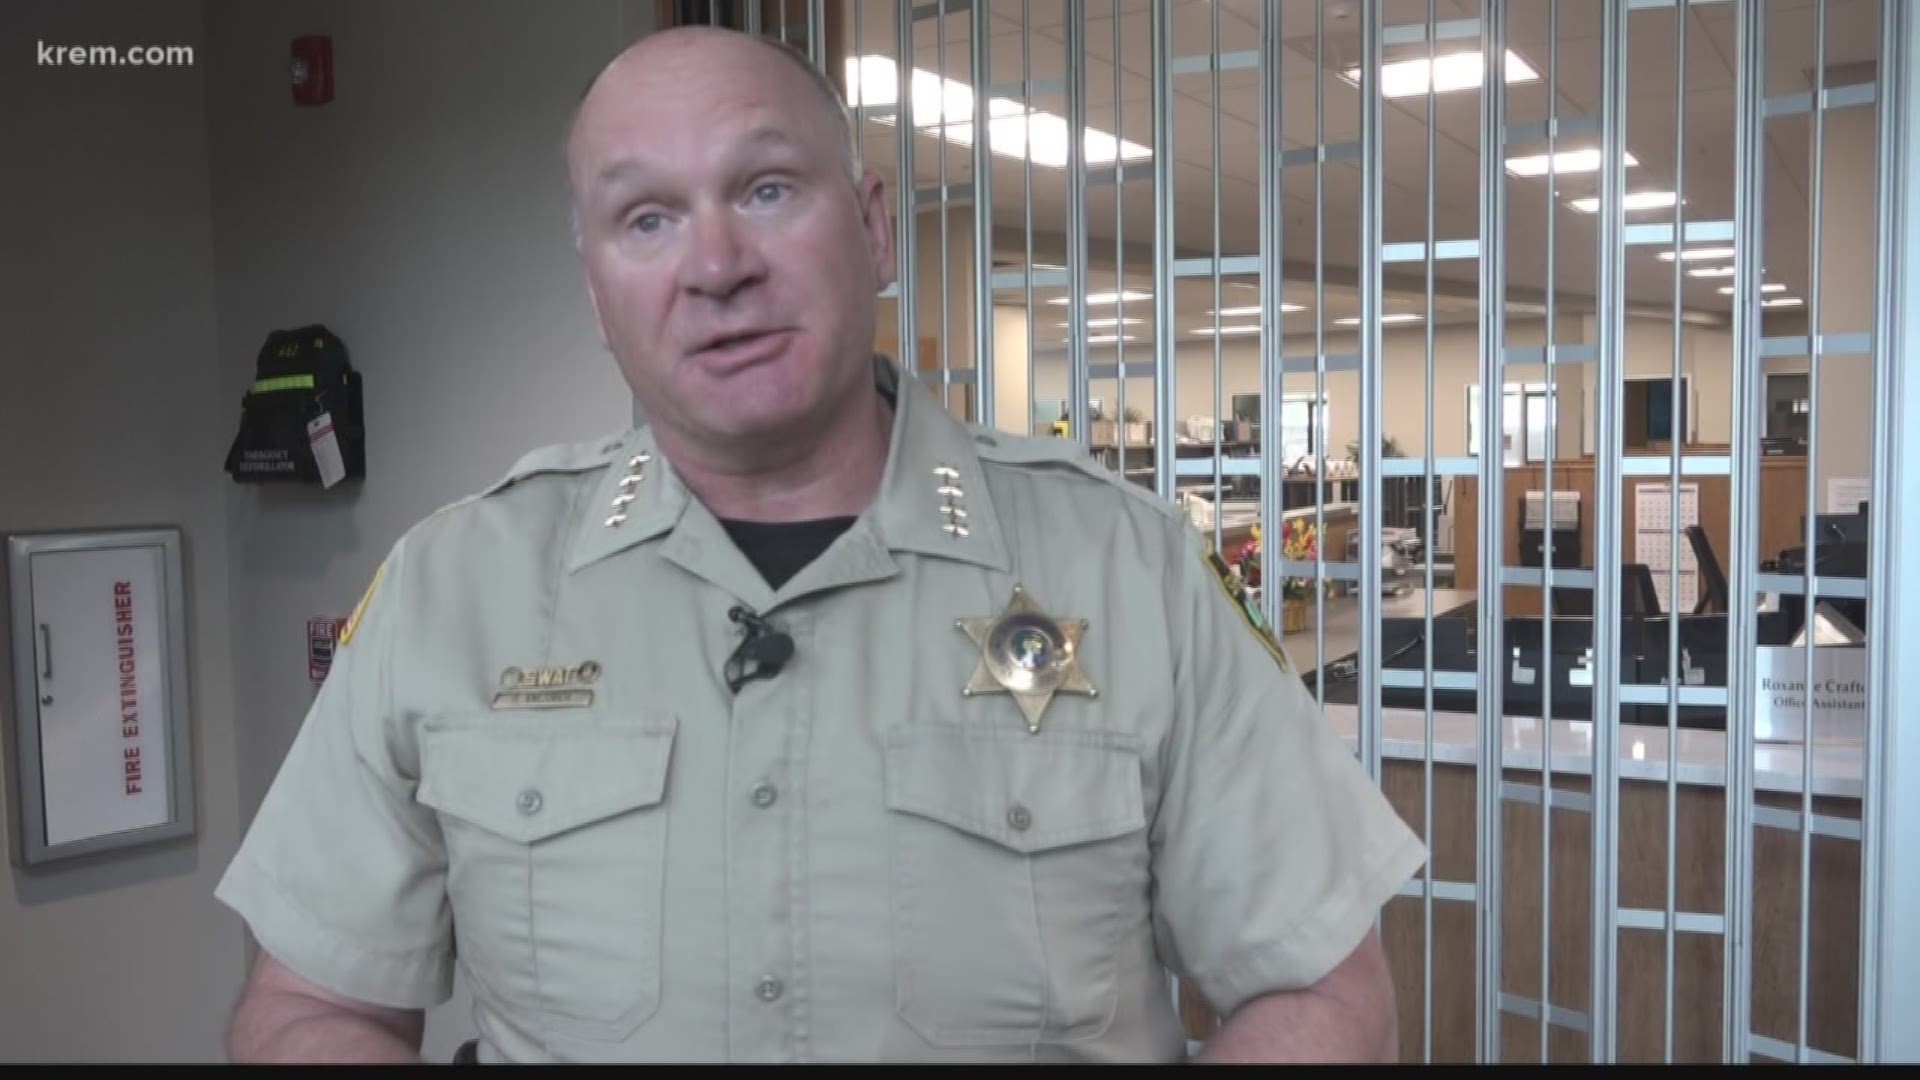 Spokane County Sheriff Ozzie Knezovich says the proposed plan for a new jail addresses all of the problems raised in public meetings on criminal justice reform.